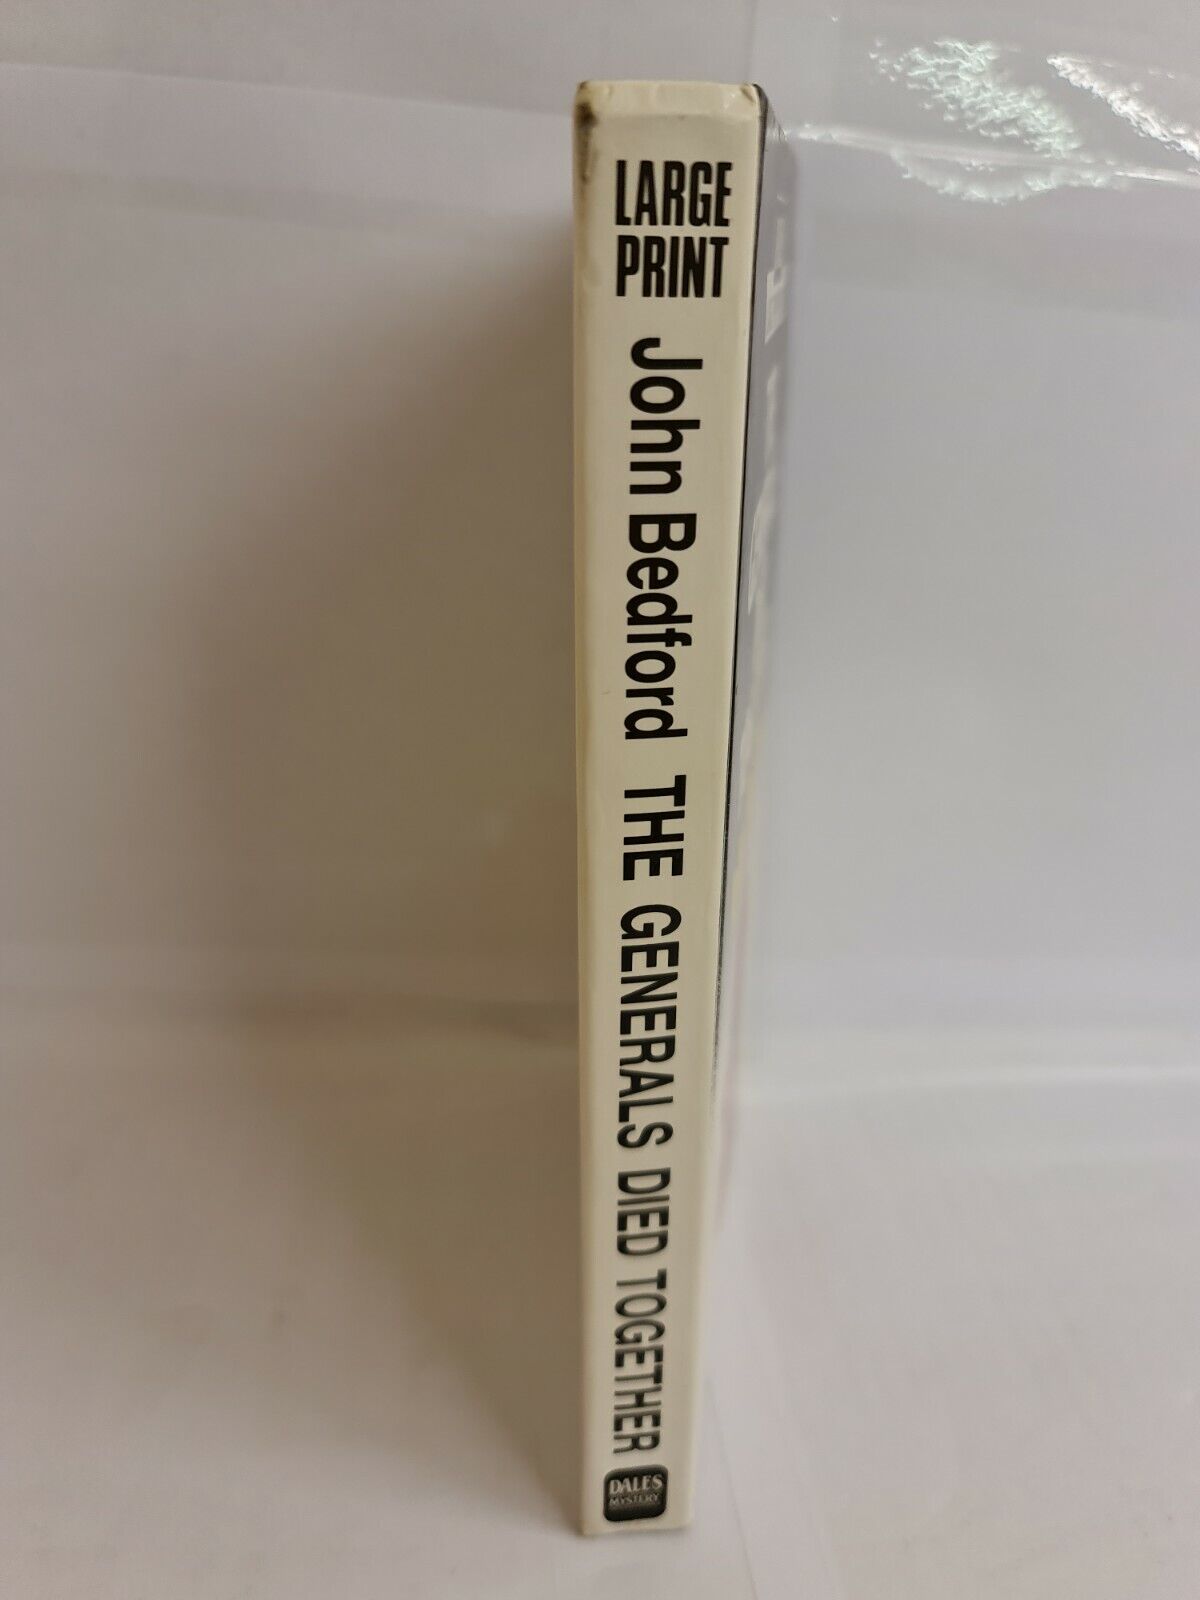 The Generals Died Together by John Bedford (1990) LARGE PRINT